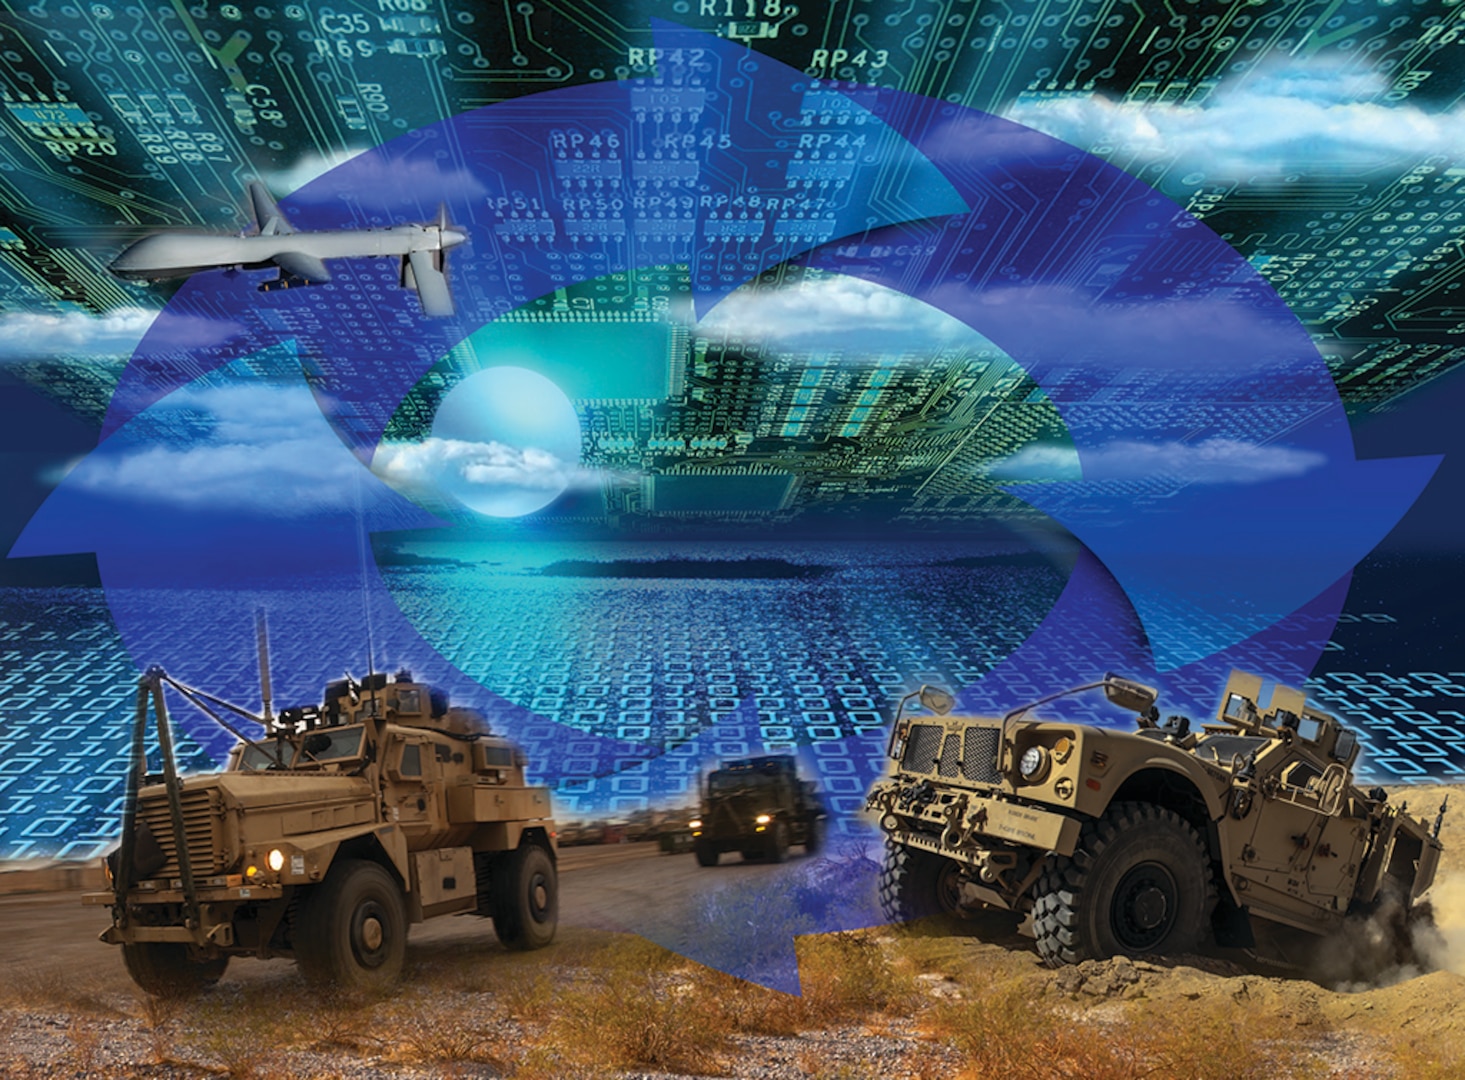 File photo:  The boundaries between traditional cyber threats and traditional electronic warfare threats have blurred. The Integrated Cyber and Electronic Warfare program at the Army Research, Development and Engineering Command’s Communications-Electronics Research, Development and Engineering Center looks to leverage cyber and electronic warfare capabilities as an integrated system to increase situational awareness of commanders. Army illustration 